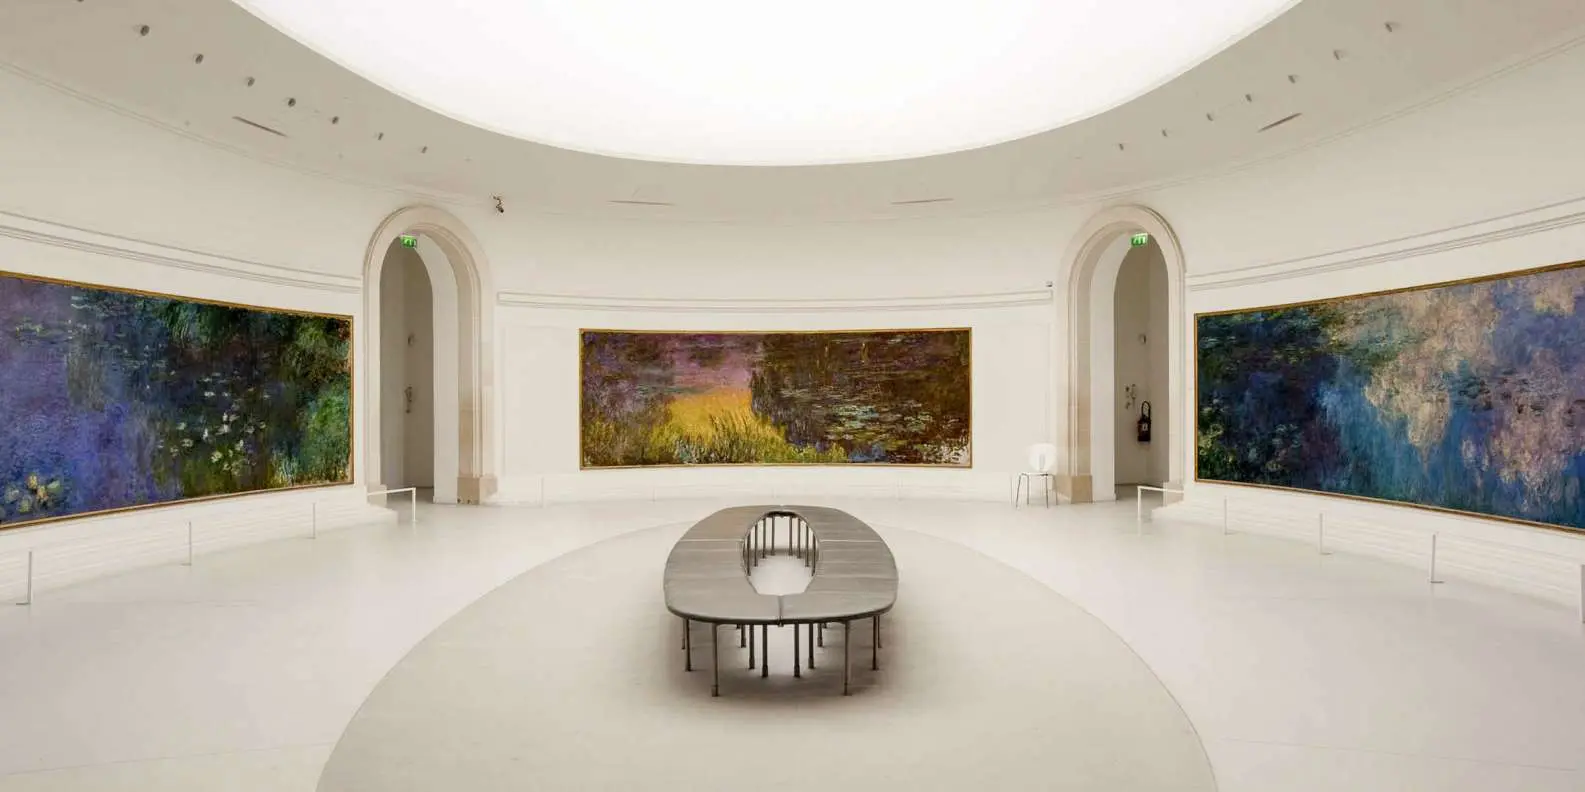 The Orangerie Museum: A Haven for Monet’s Water Lilies